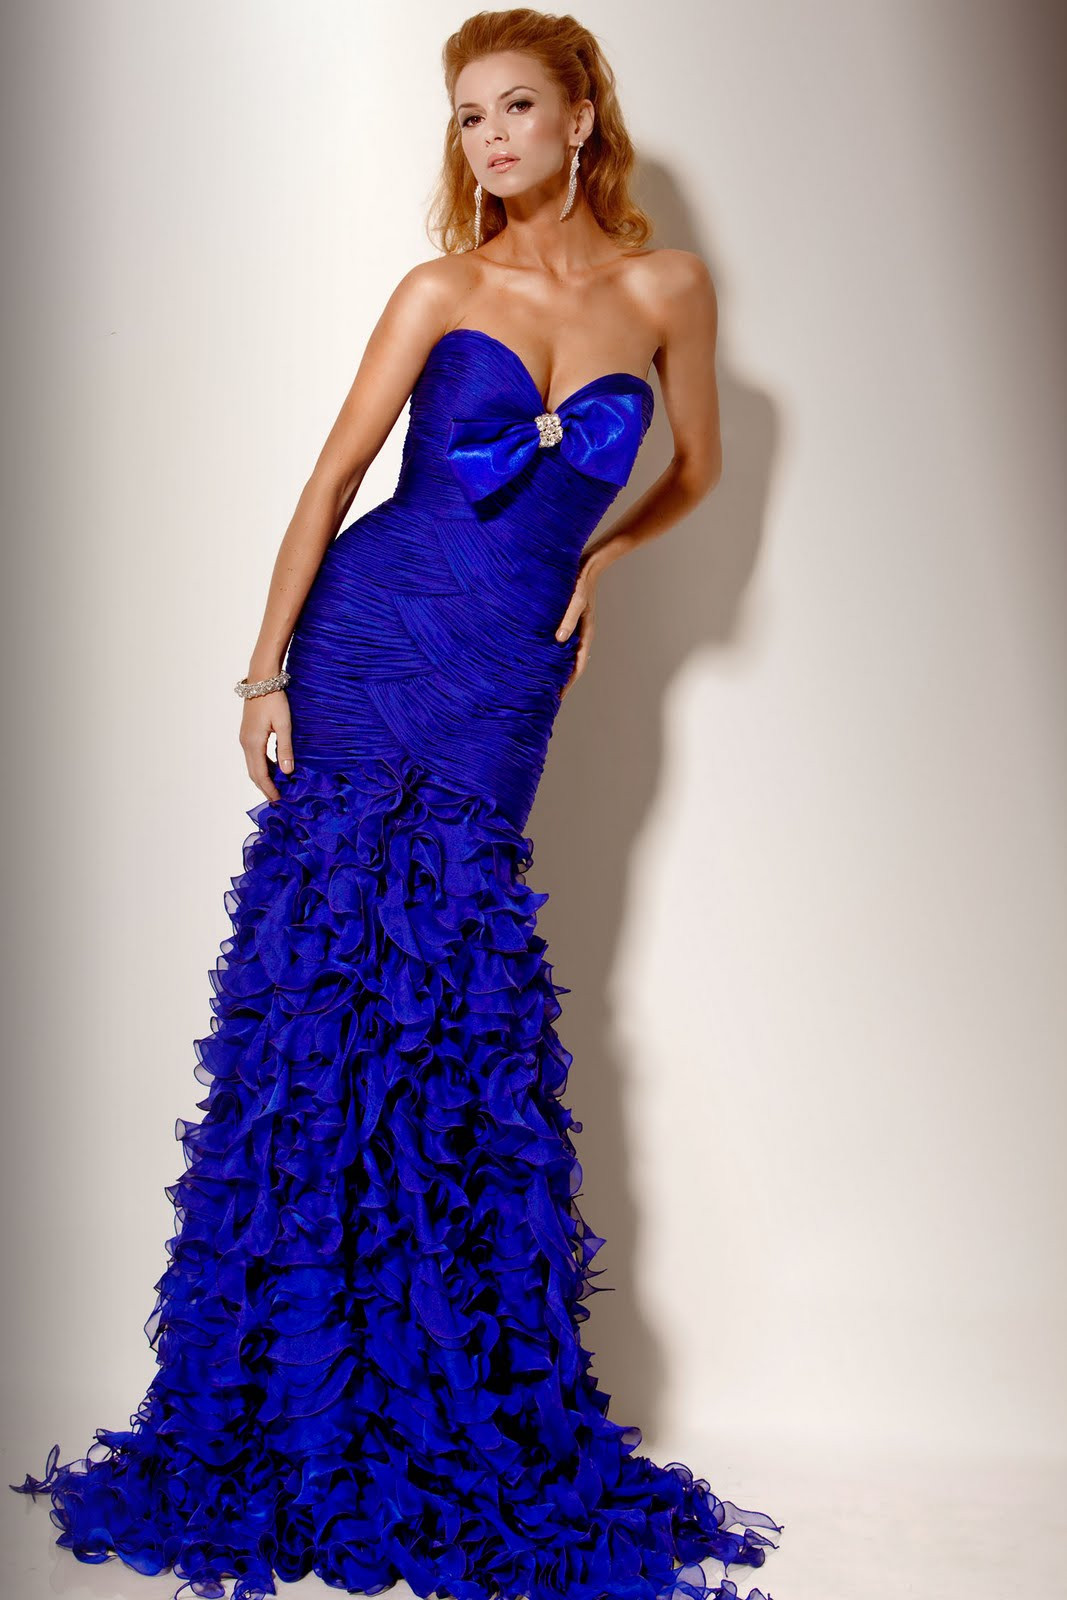 Prom Dress Hairstyles
 CUTE SHORT HAIRSTYLES ARE CLASSIC BLUE PROM DRESSES ARE